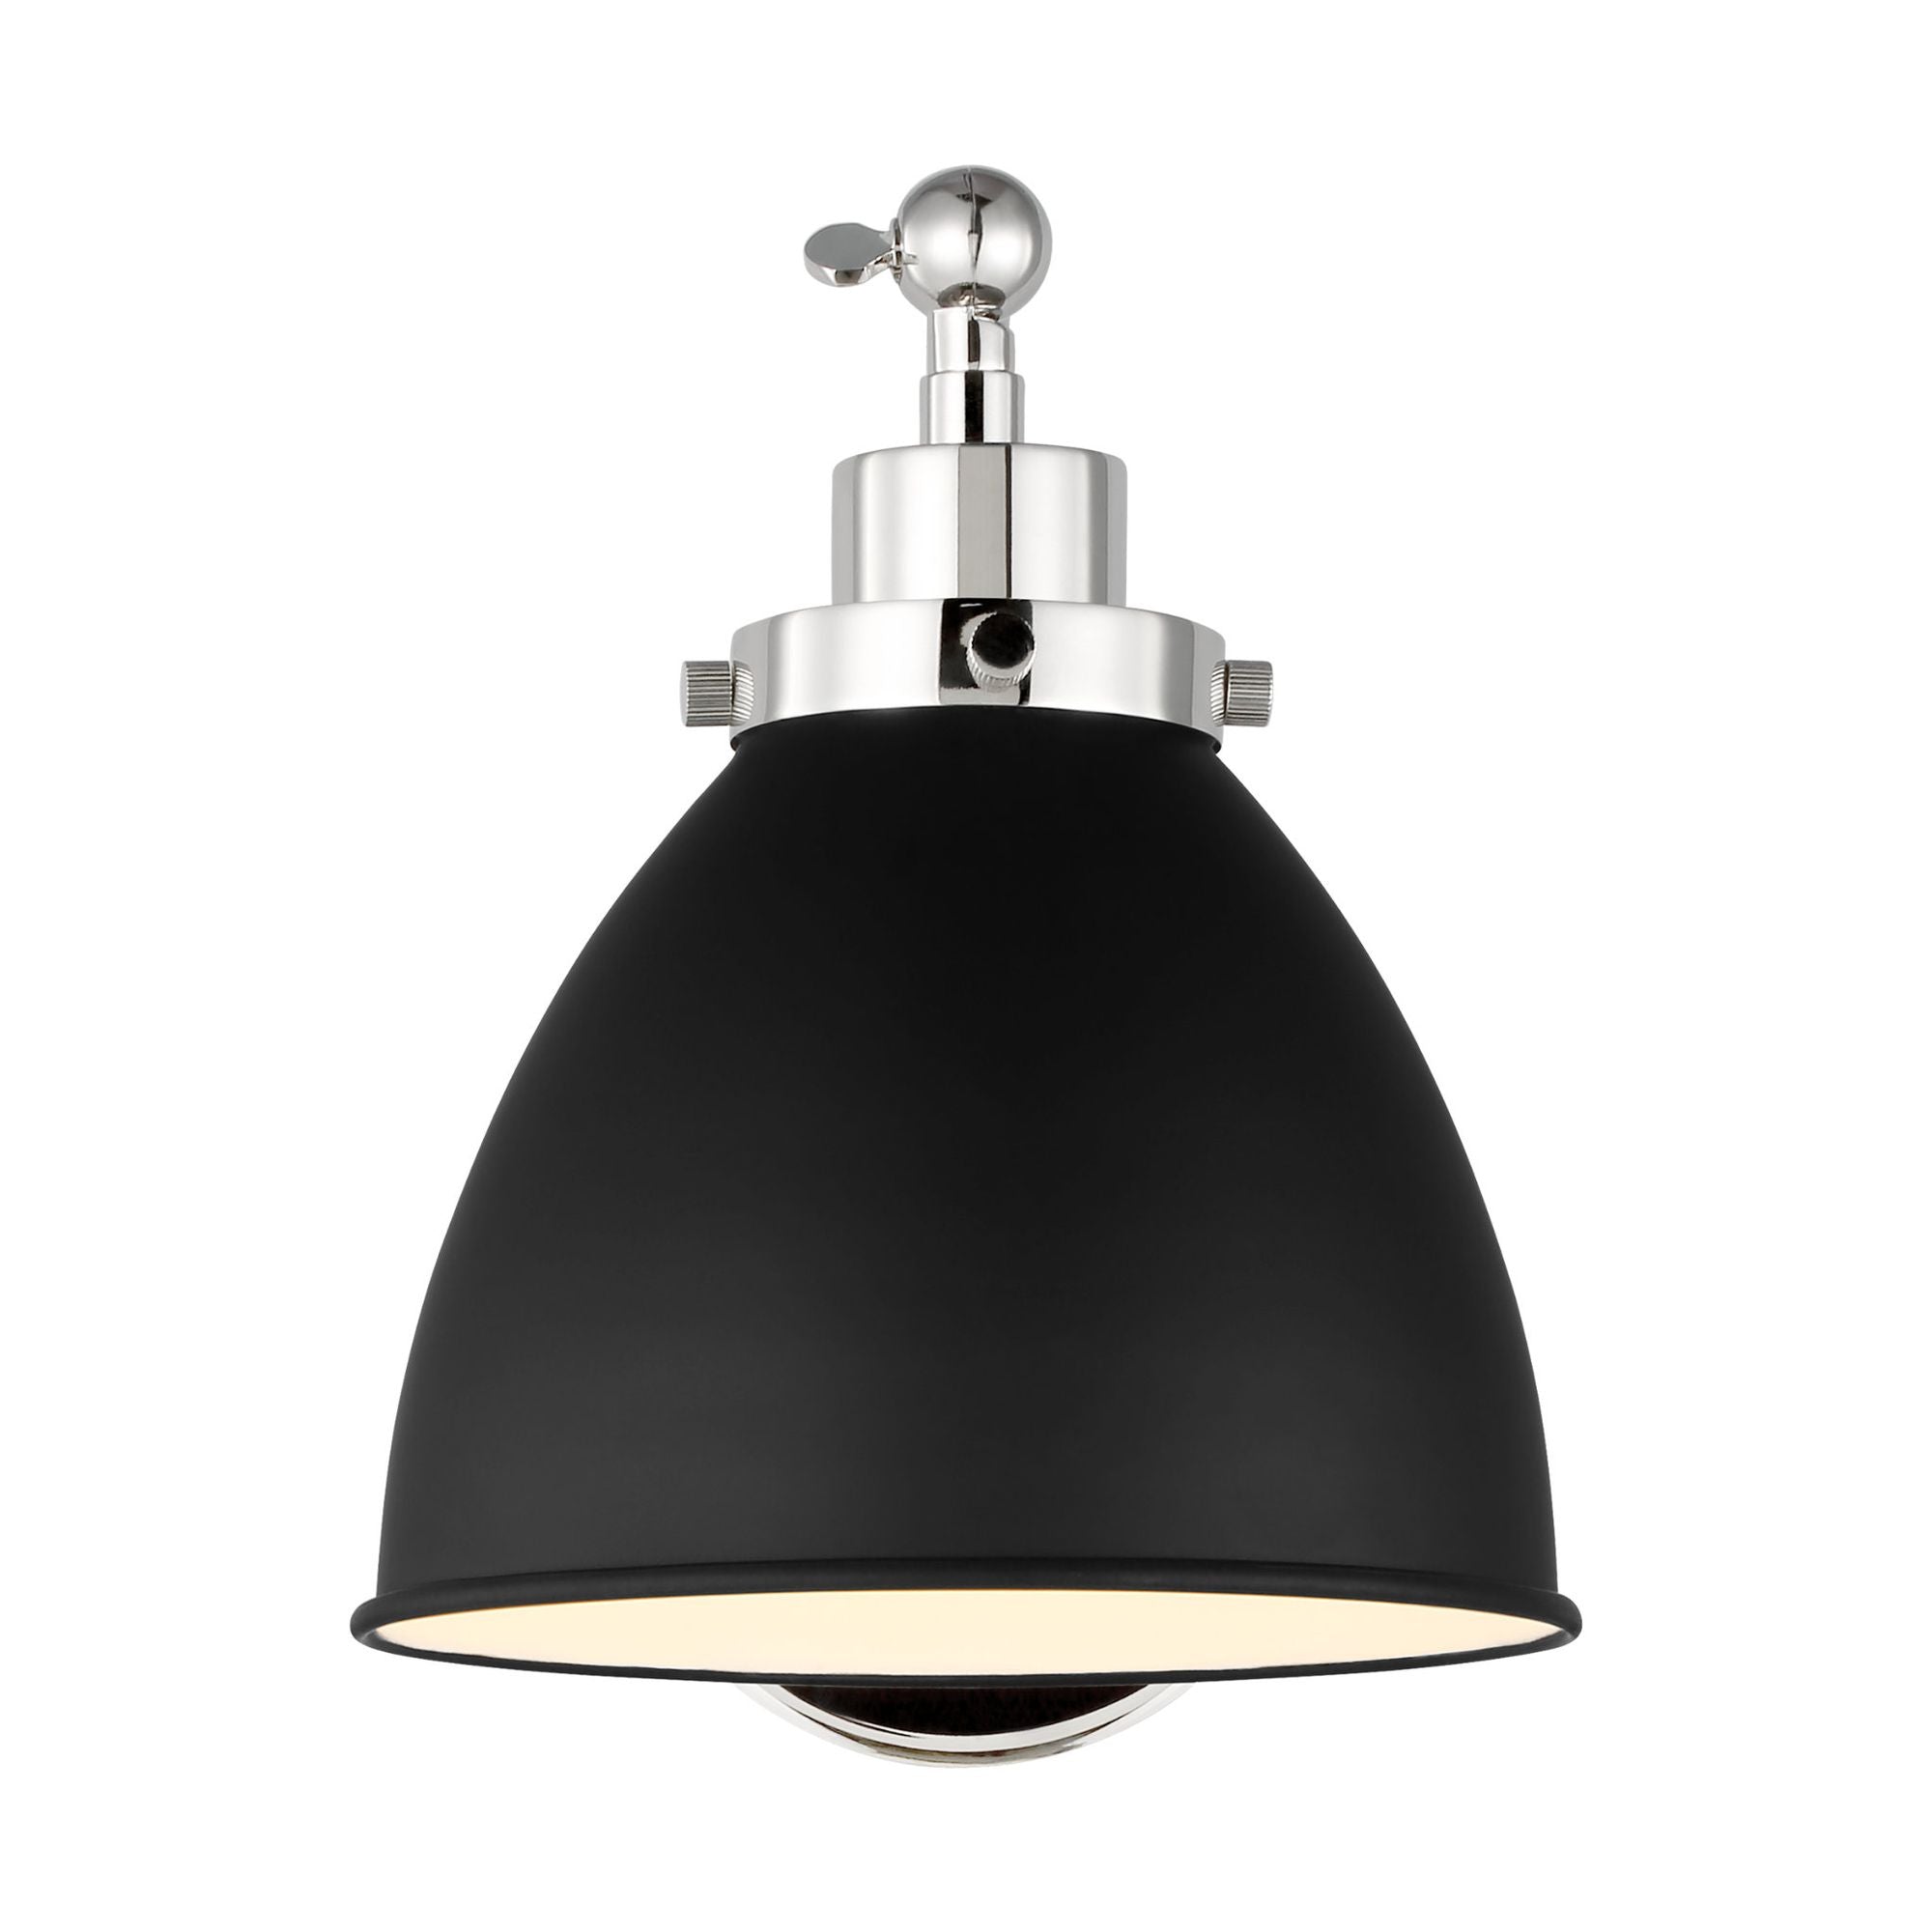 Chapman & Myers Wellfleet Single Arm Dome Task Sconce in Midnight Black and Polished Nickel